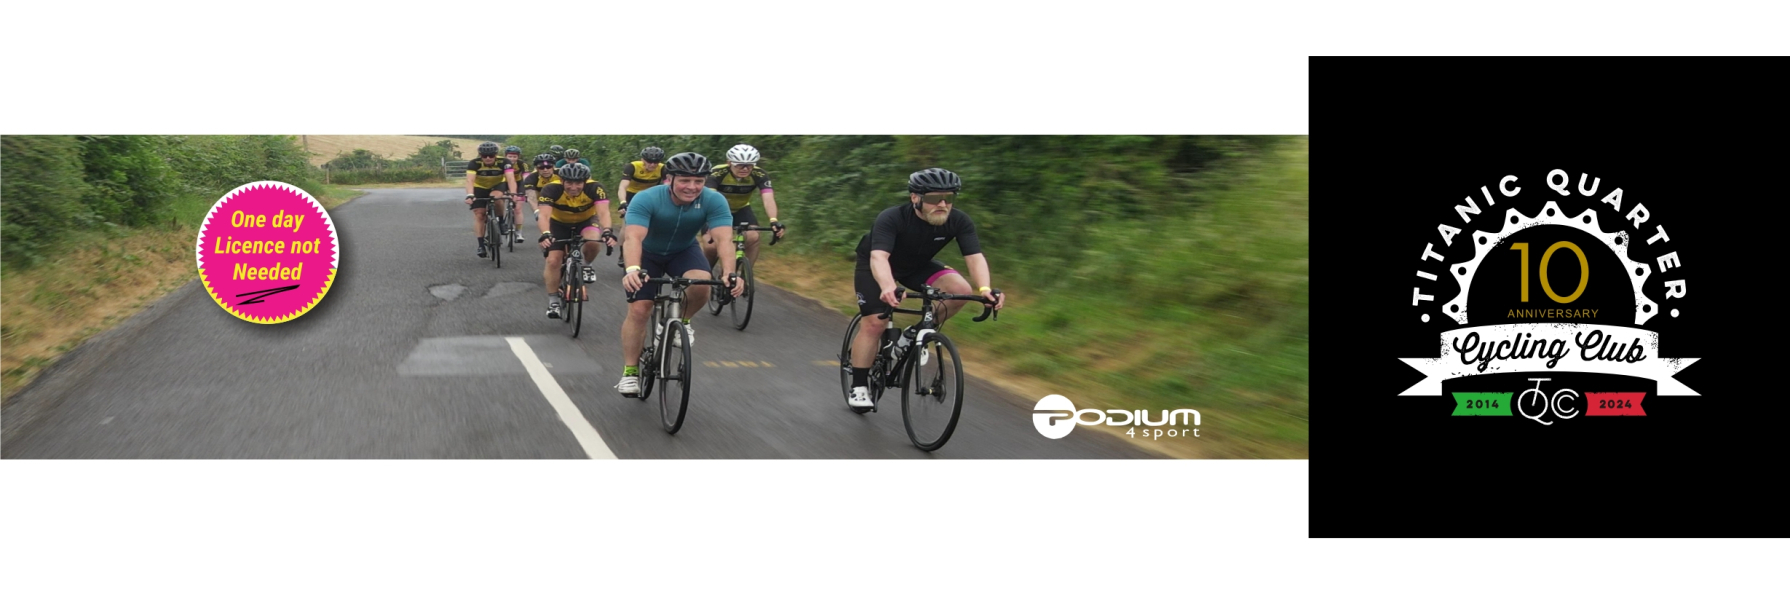 Summer Solstice Sportive carousel image 1